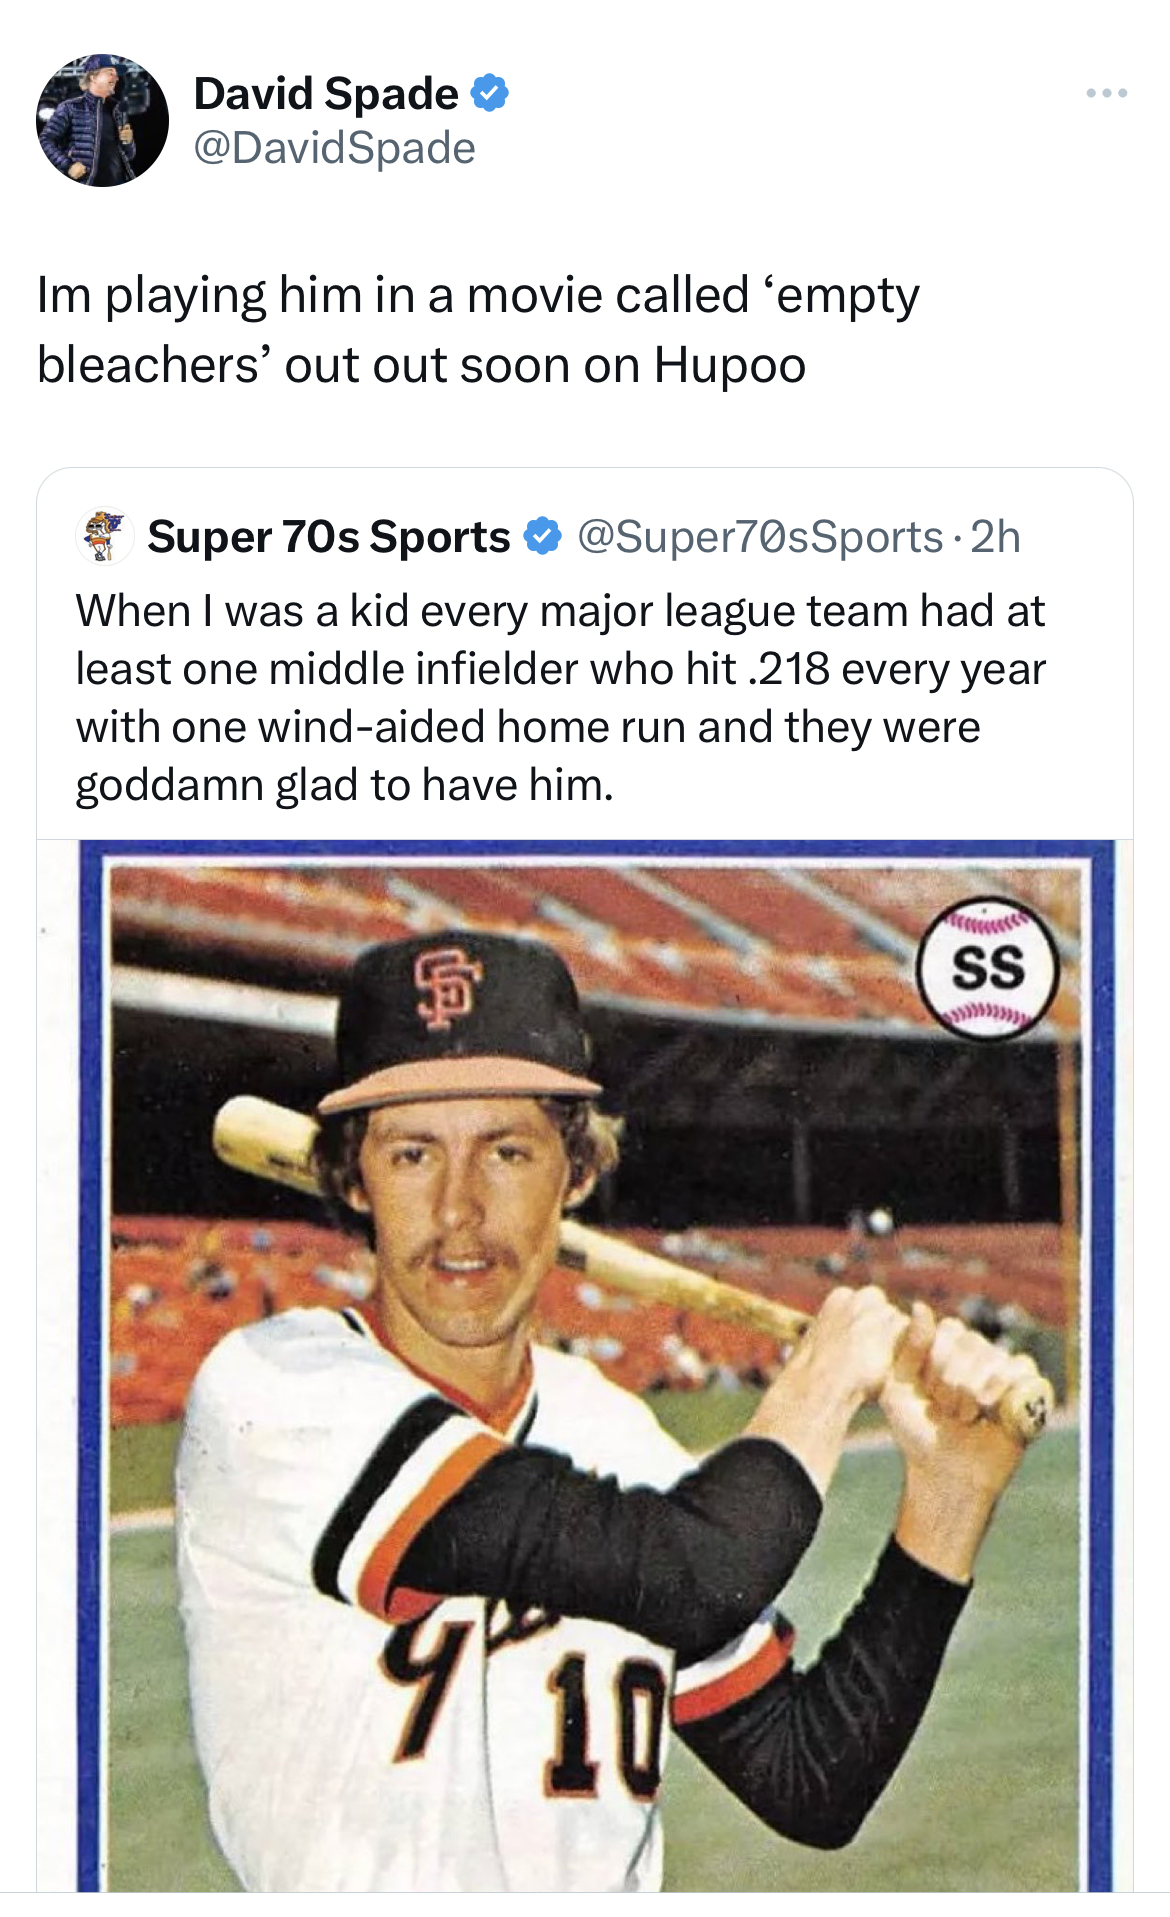 savage tweets roasting celebs - 1980 san fransisco giants uniforms - David Spade Im playing him in a movie called 'empty bleachers' out out soon on Hupoo Super 70s Sports When I was a kid every major league team had at least one middle infielder who hit .